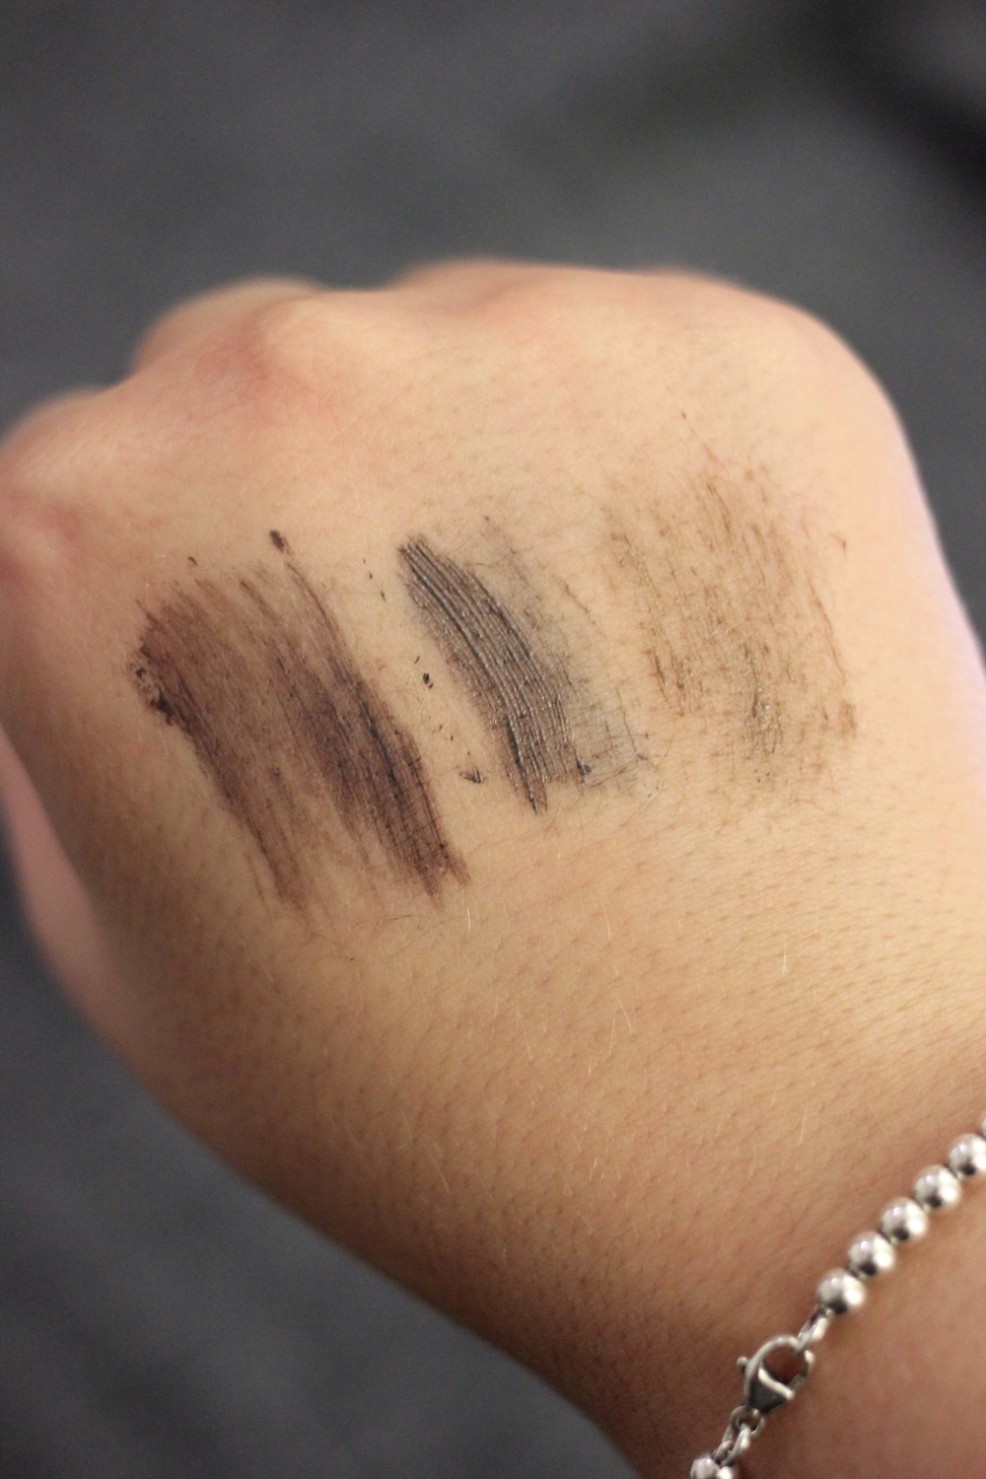 Swatches, left to right, Rimmel Brow This Way, Benefit Gimme Brow, Maybelline Brow Drama.